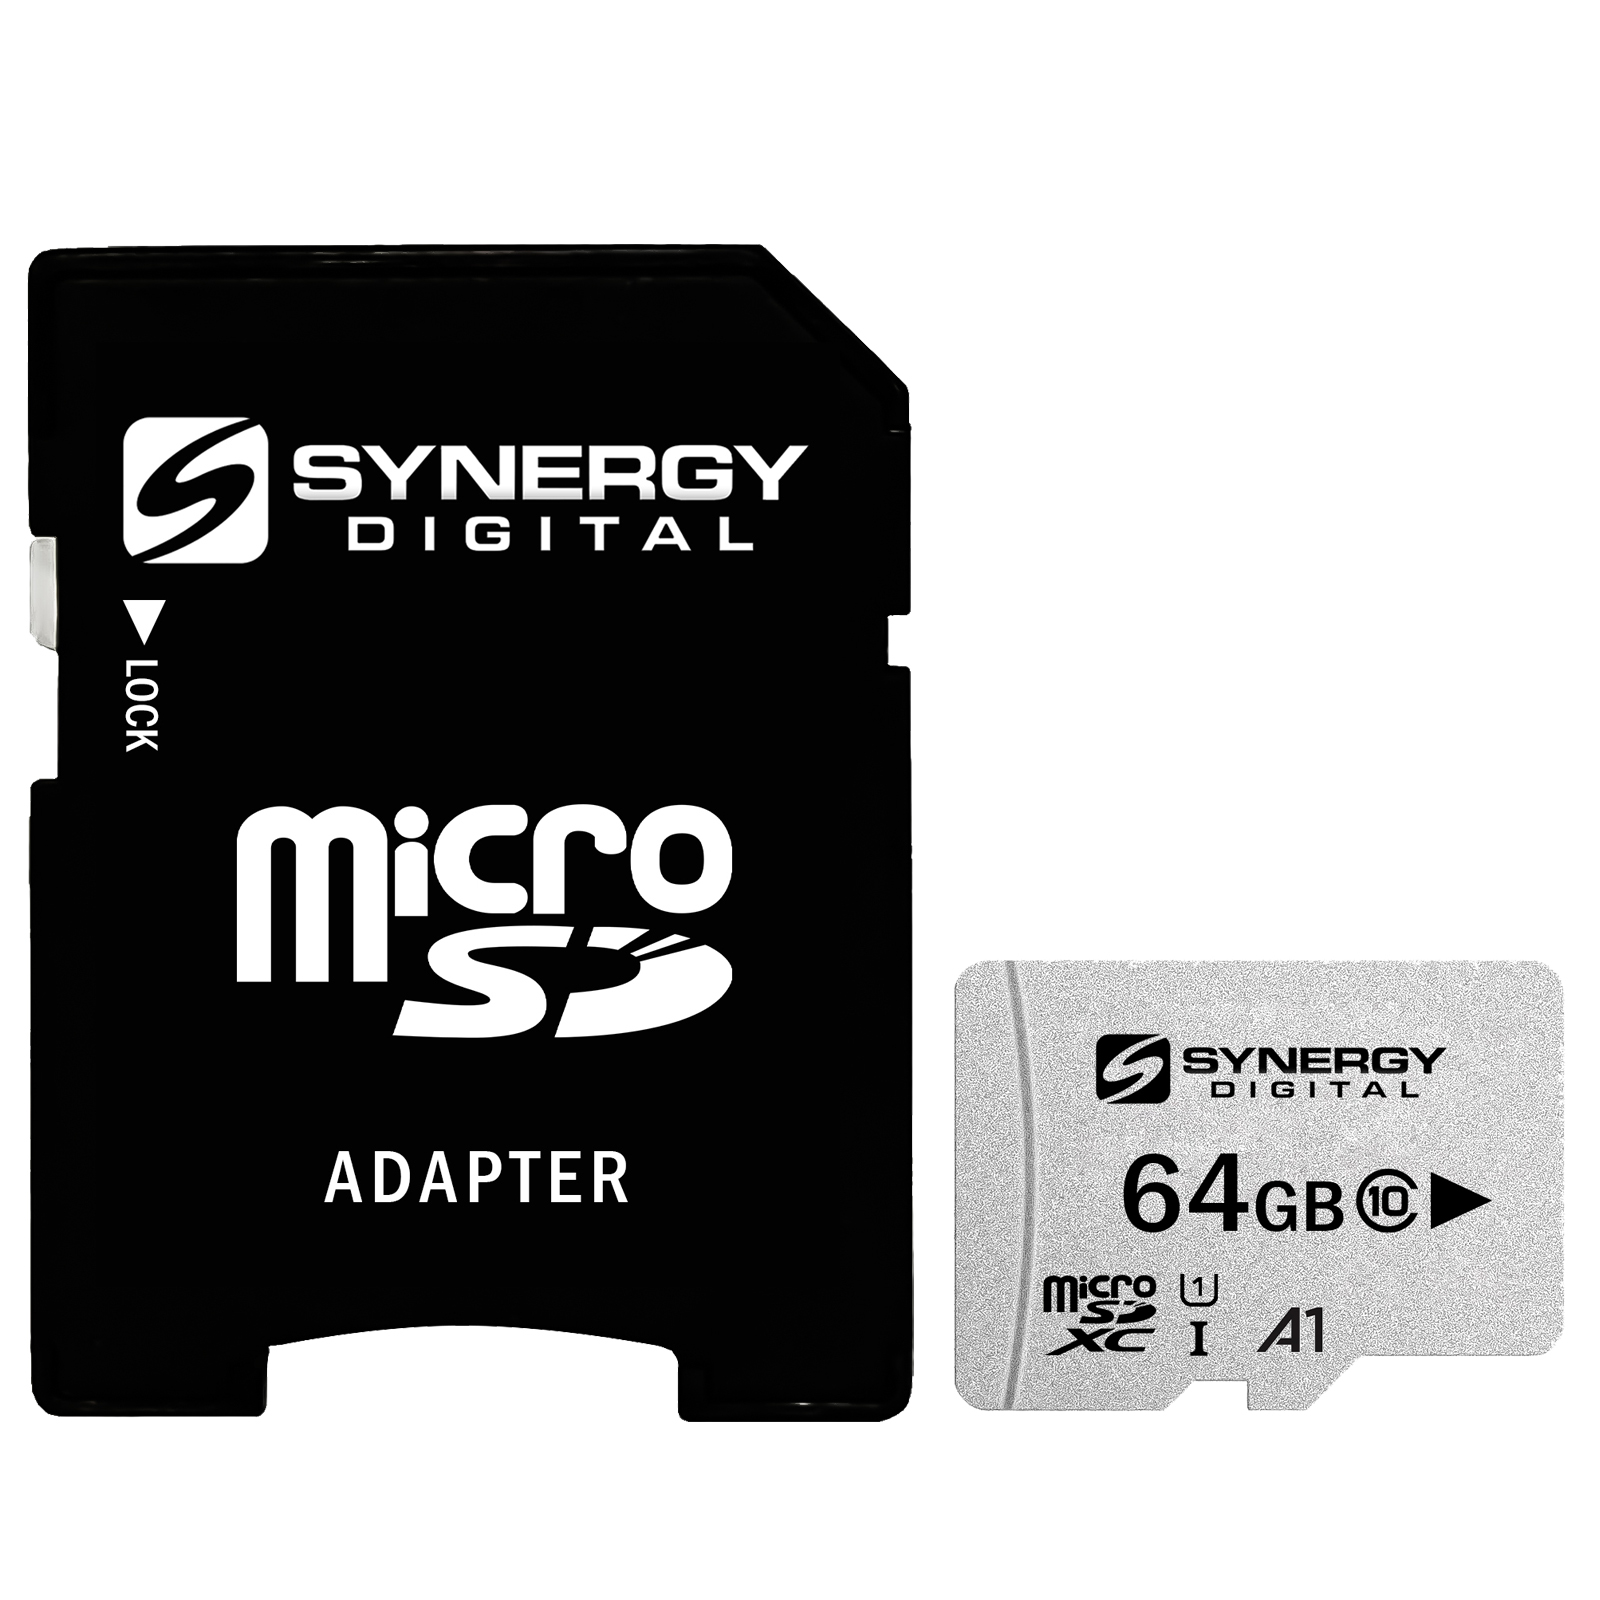 64GB microSDXC™ Class 10 Extreme Memory Card with SD™ Adapter